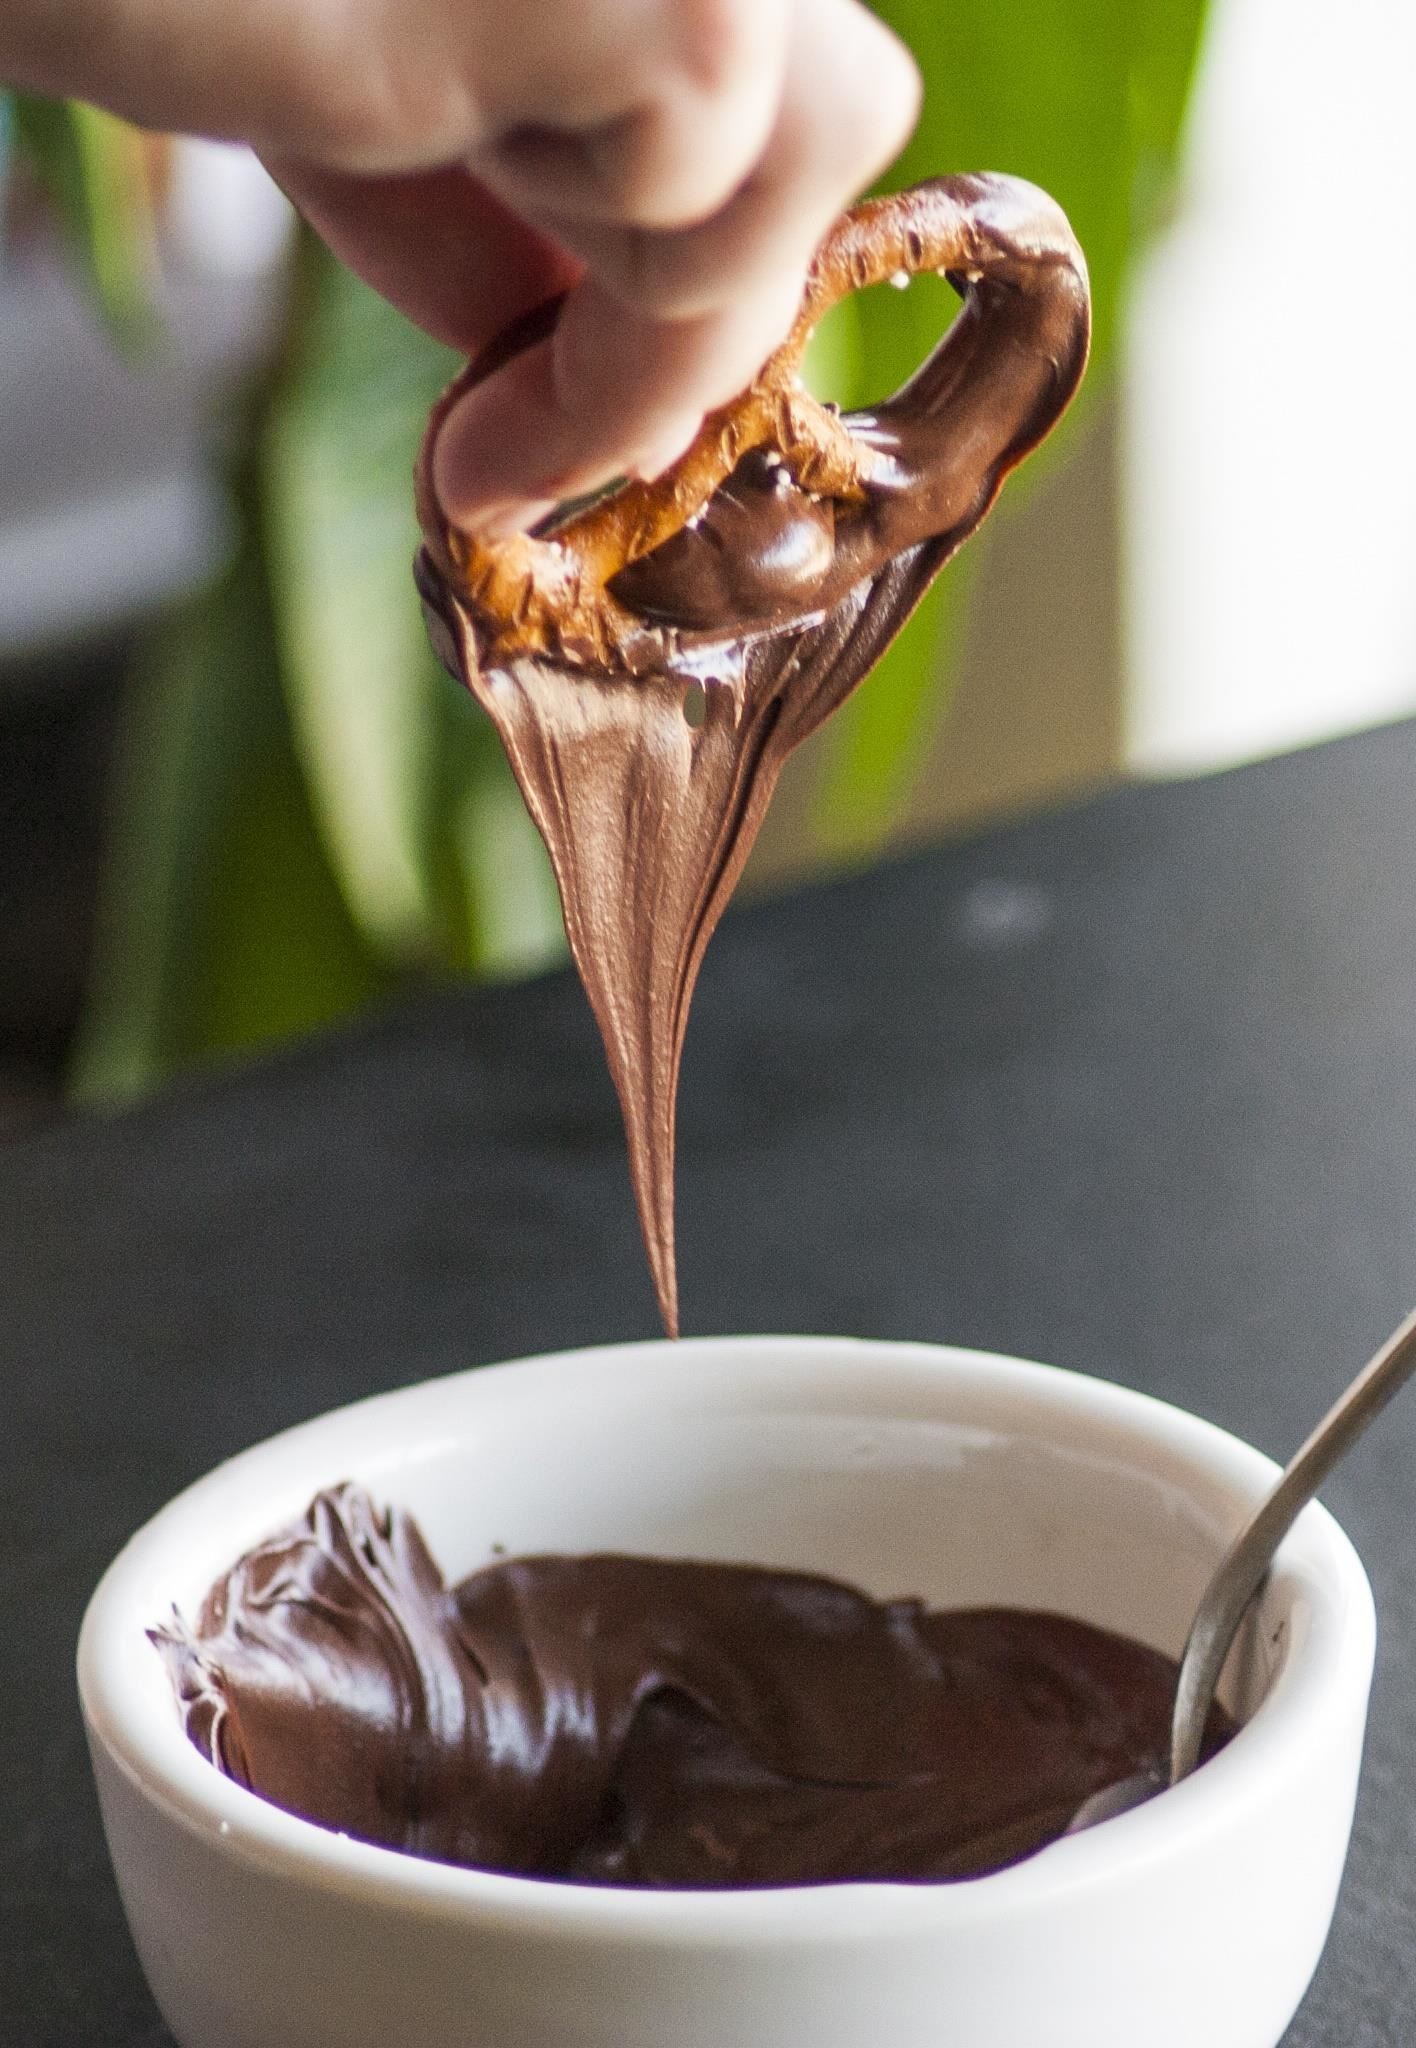 How to Melt Chocolate in Under 1 Minute Without a Stove